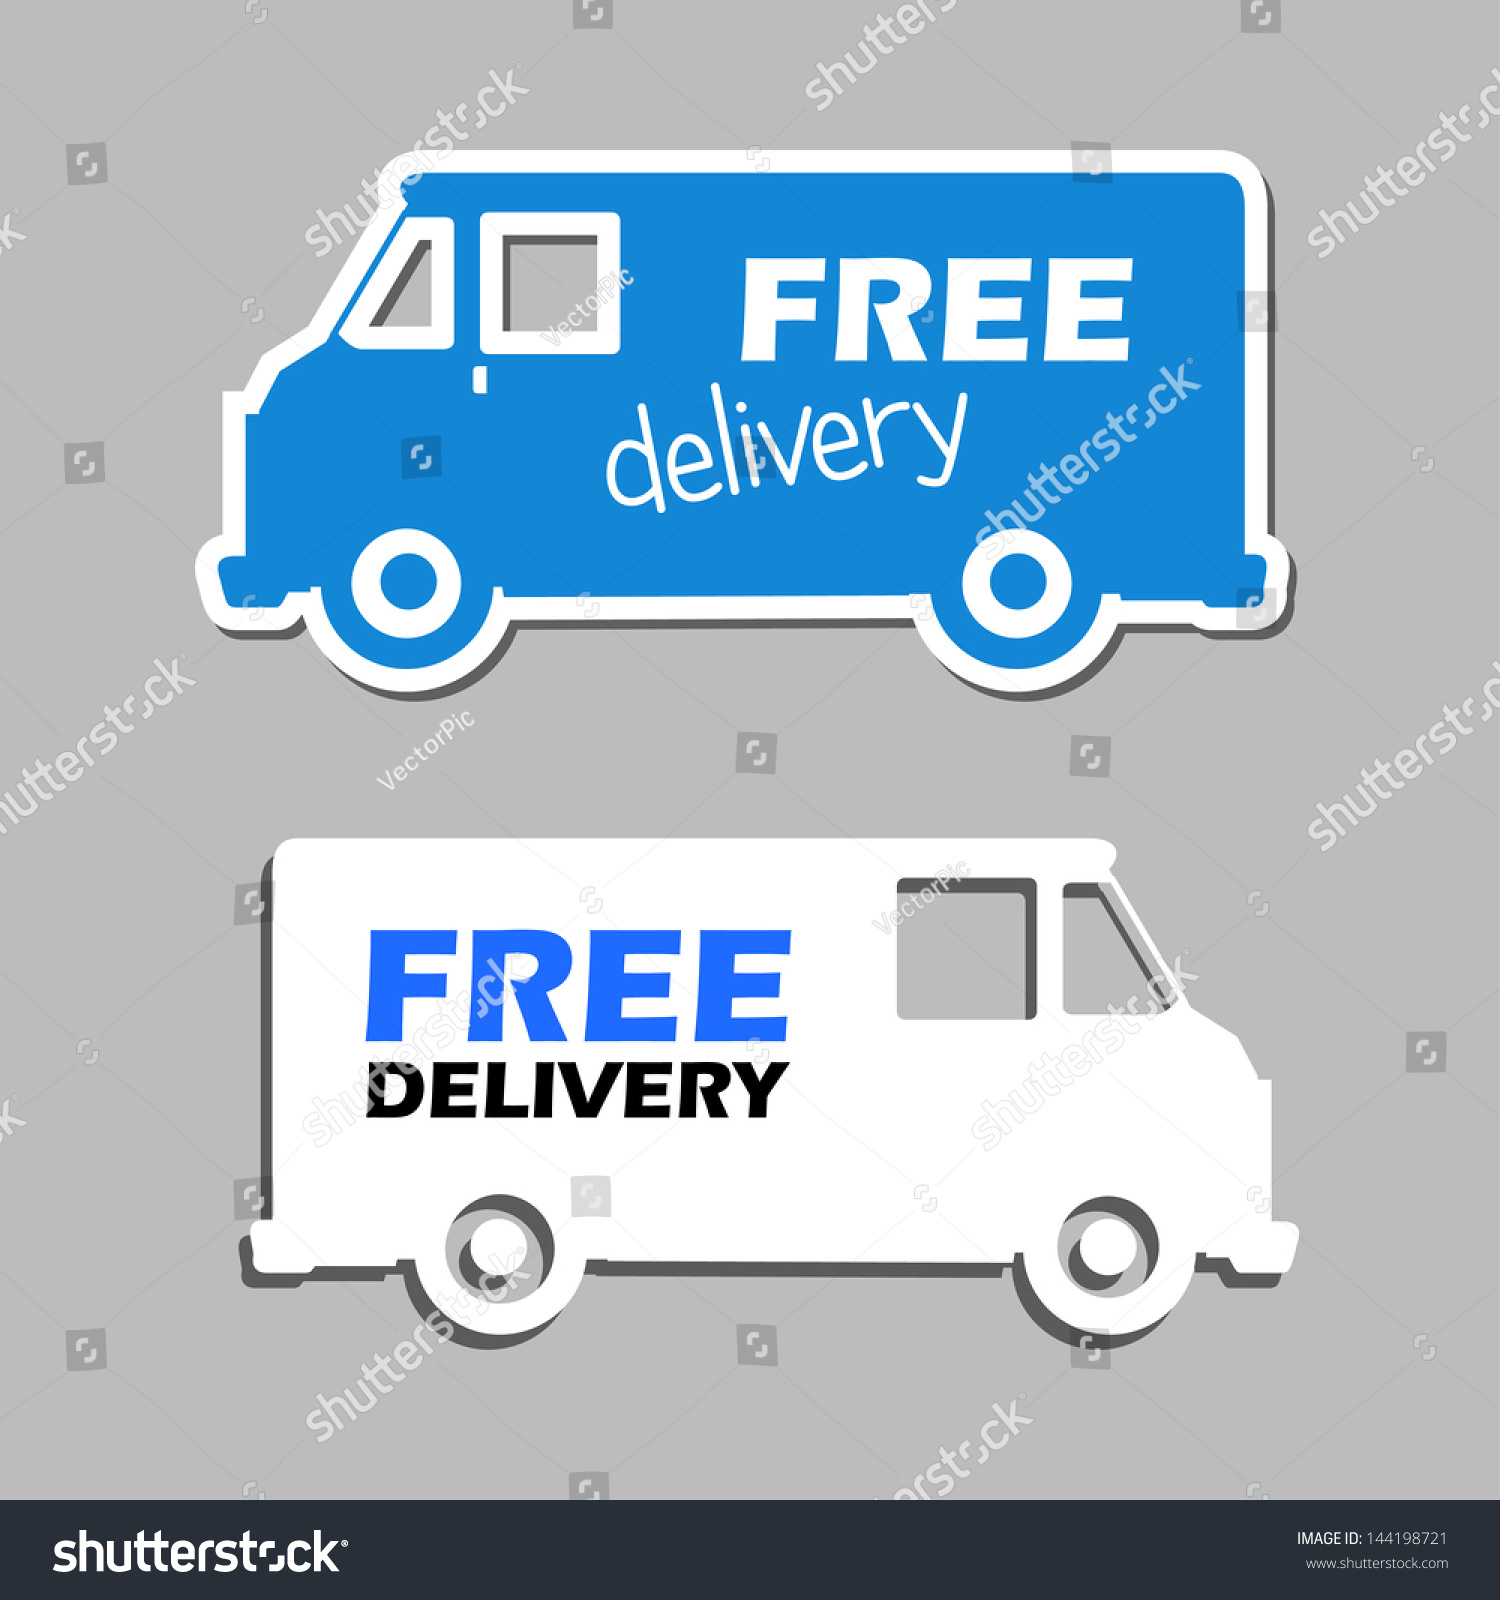 Illustration Icons Free Delivery Vector Stock Vector Royalty Free